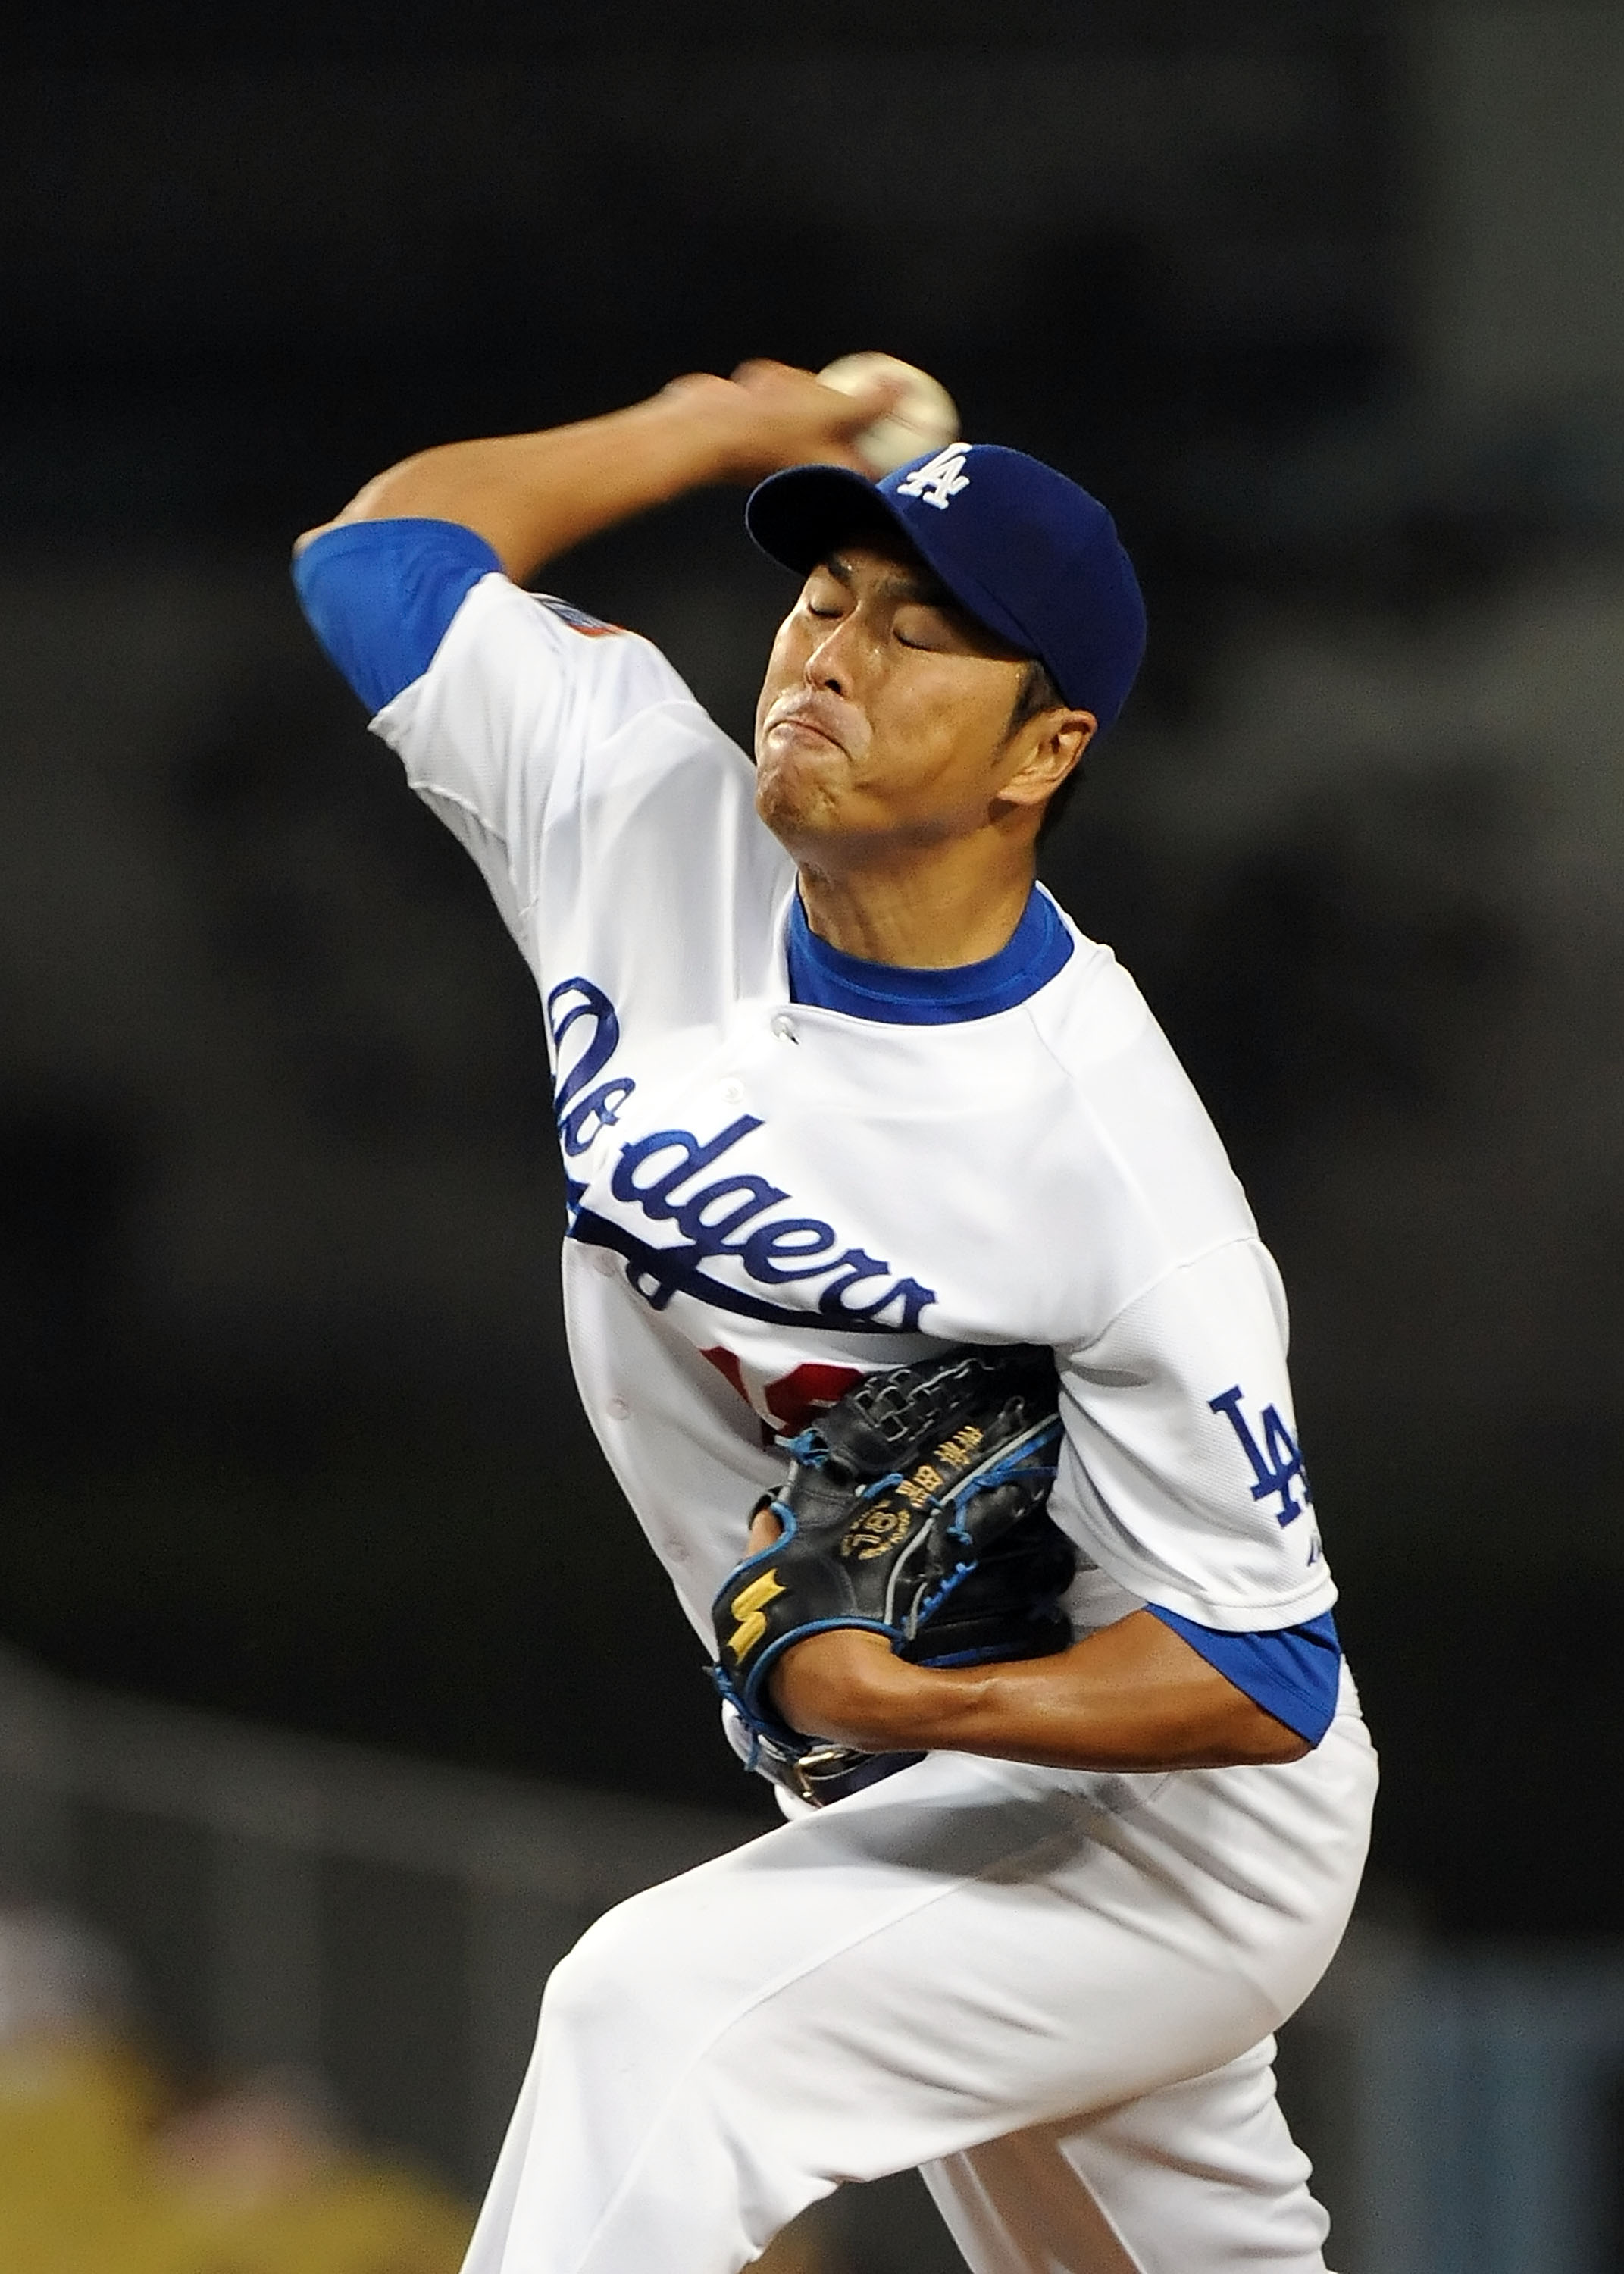 LOS ANGELES, CA - SEPTEMBER 17:  Hiroki Kuroda #18 of the Los Angeles Dodgers pitches against the Colorado Rockies at Dodger Stadium on September 17, 2010 in Los Angeles, California.  (Photo by Lisa Blumenfeld/Getty Images)